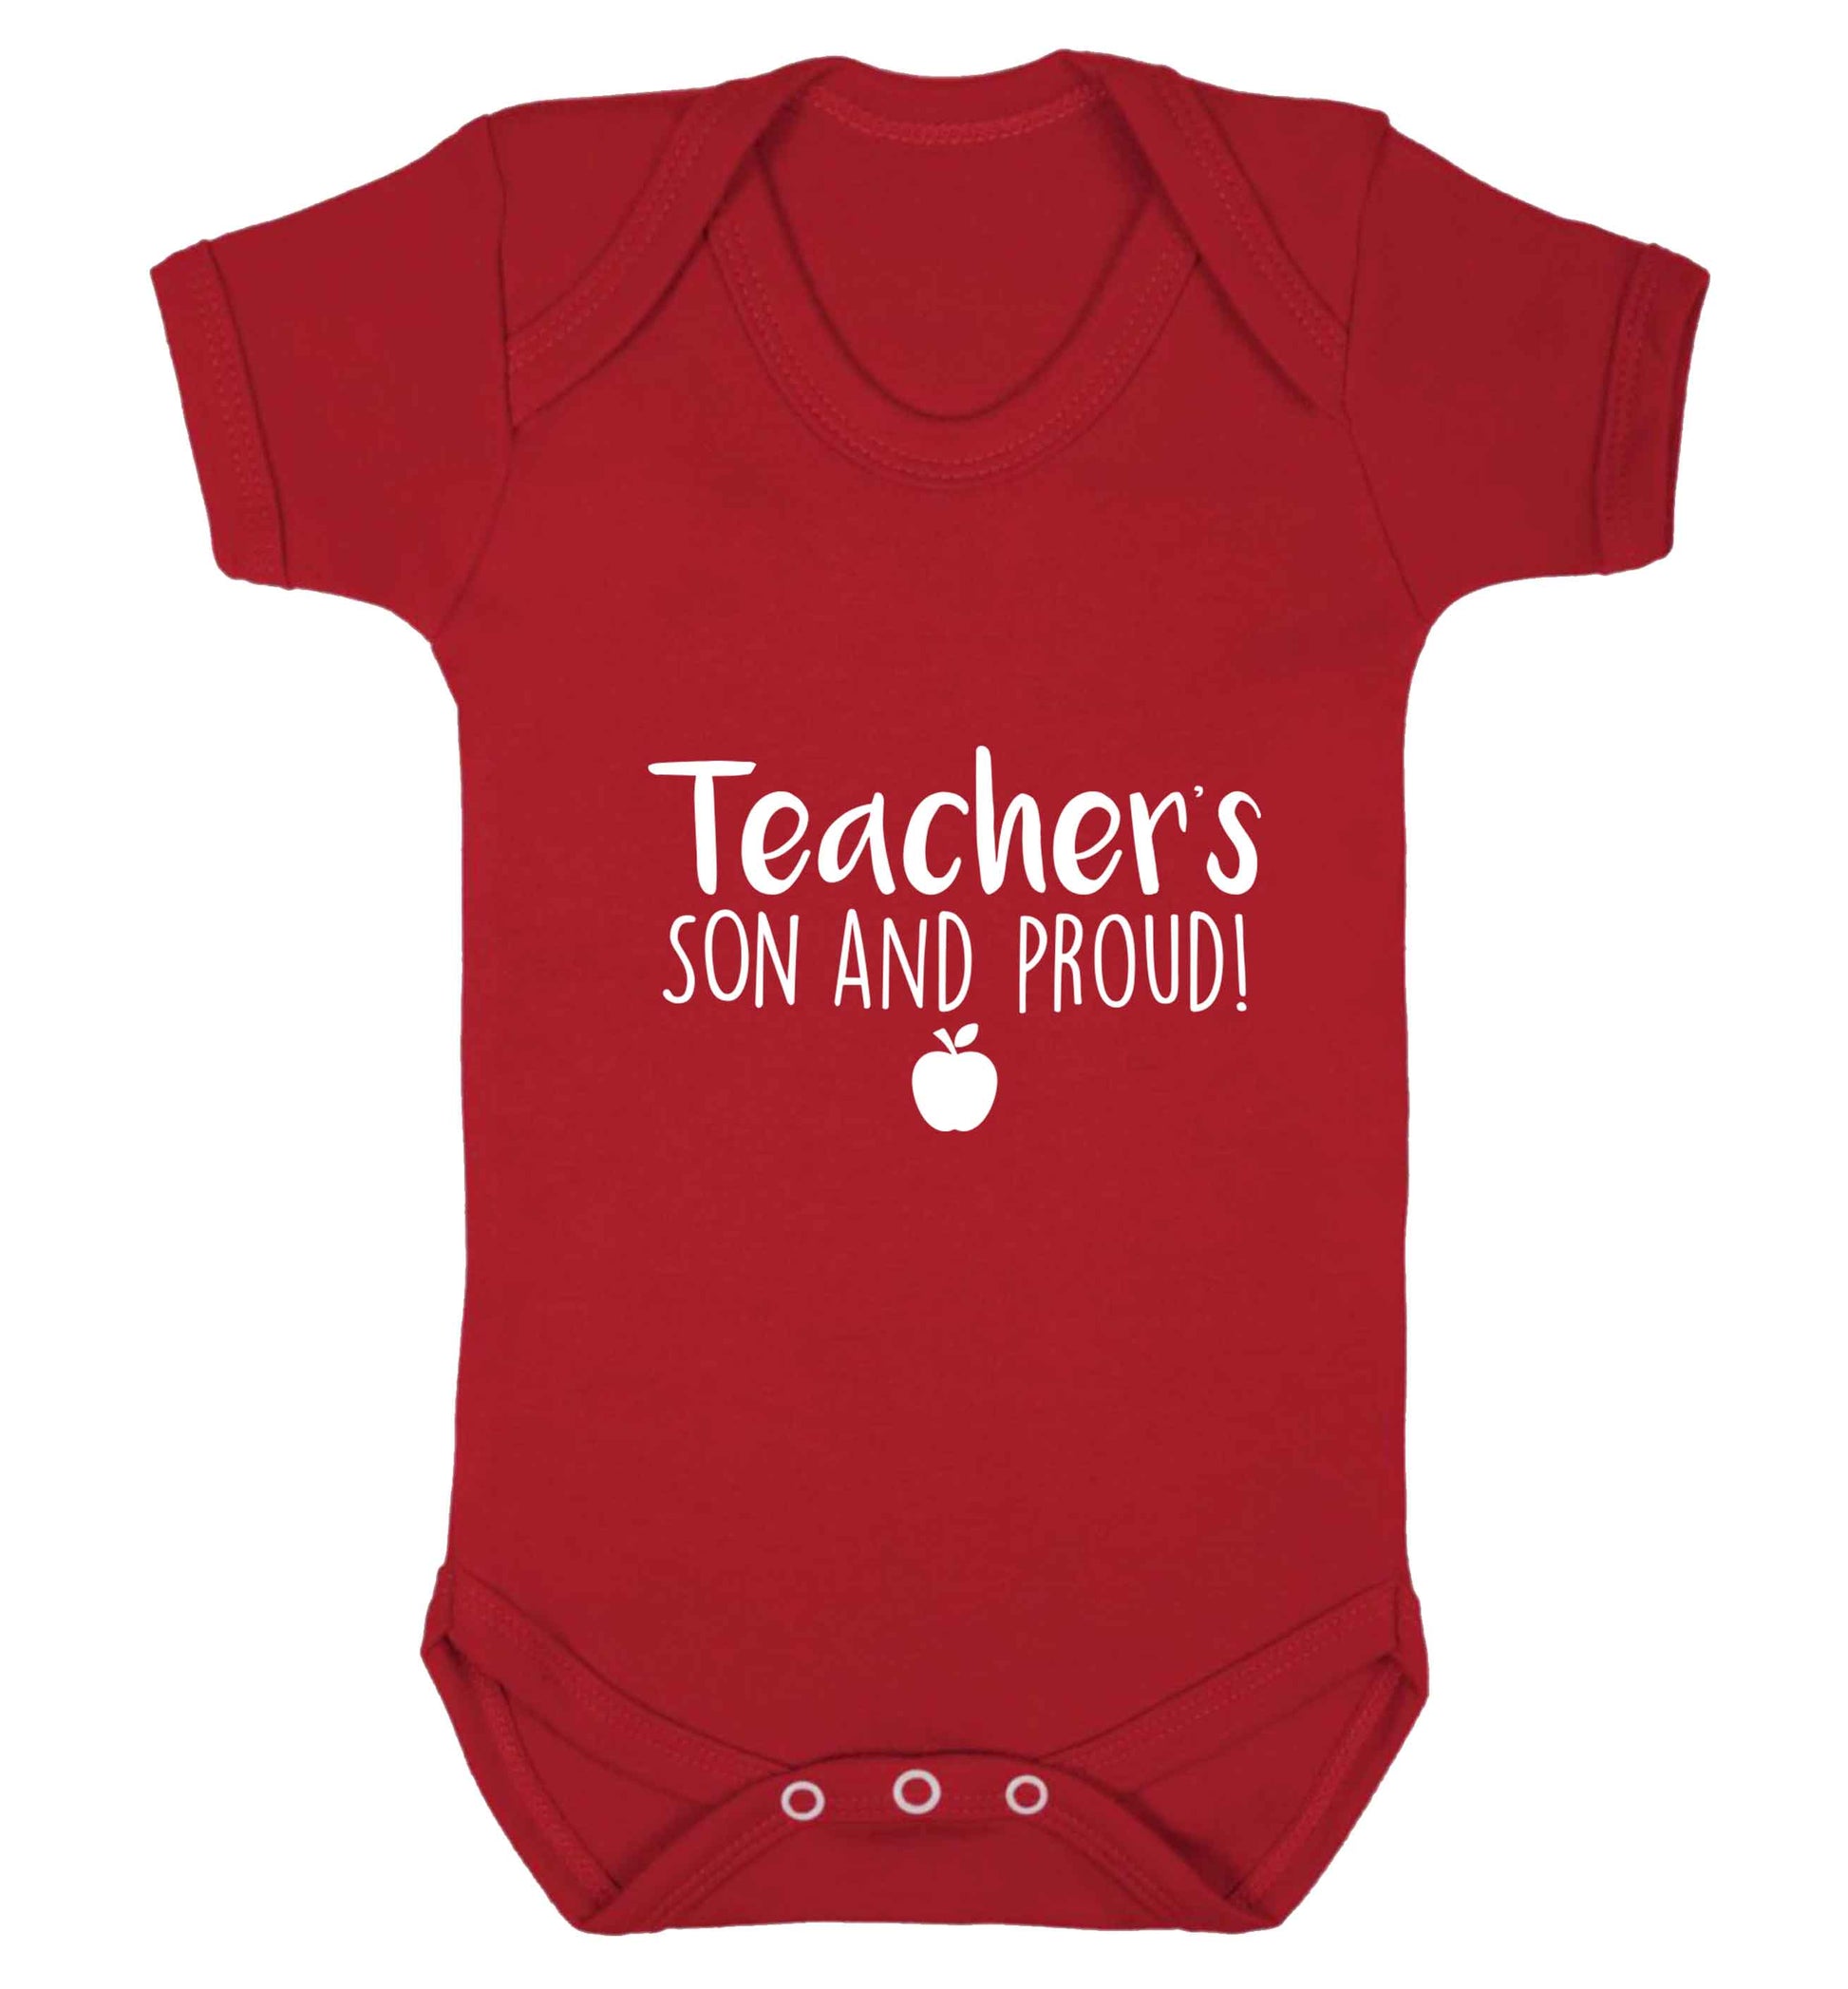 Teachers son and proud baby vest red 18-24 months